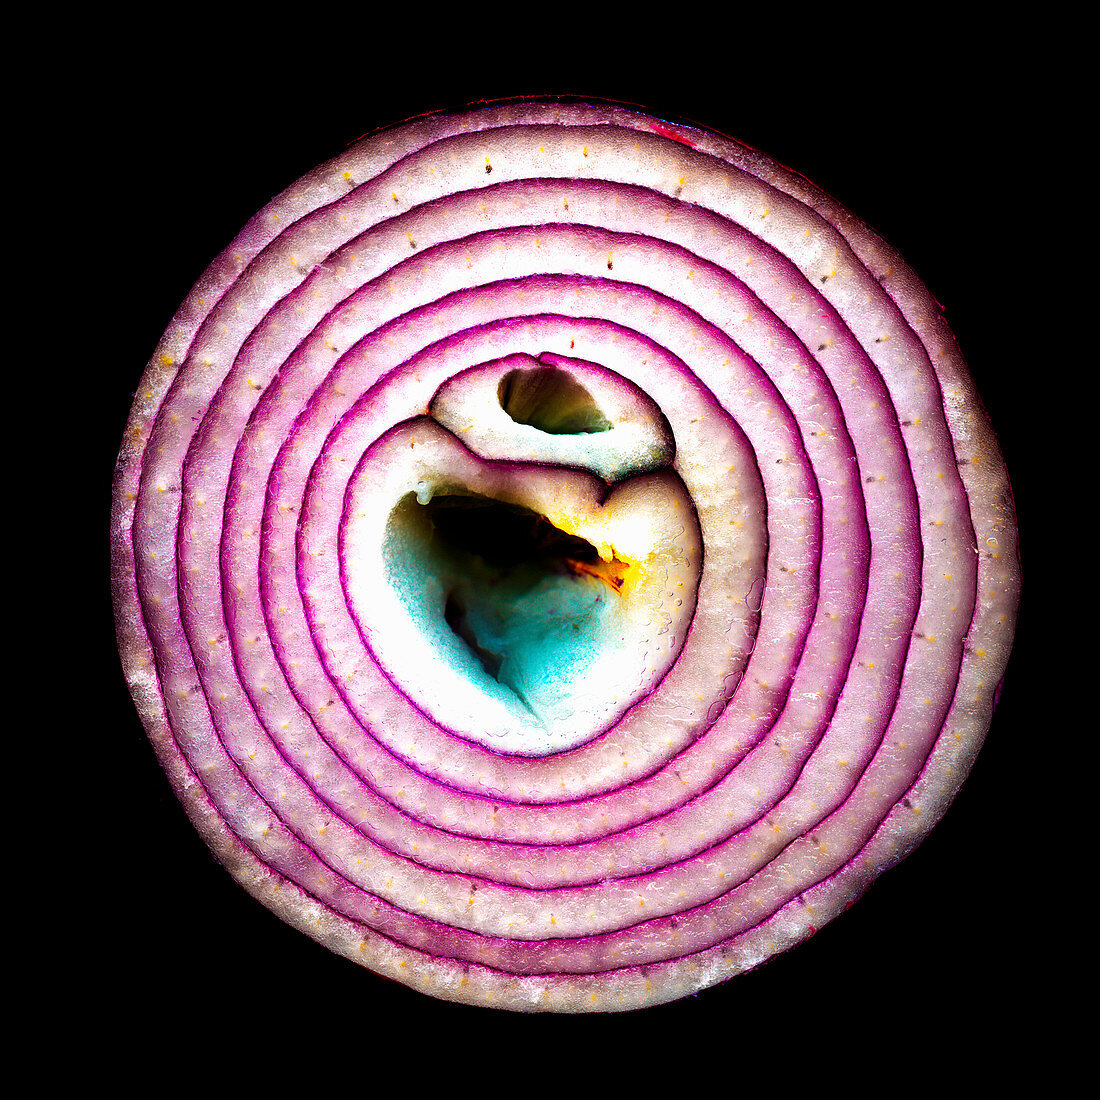 A sliced red onion against a black background (close-up)